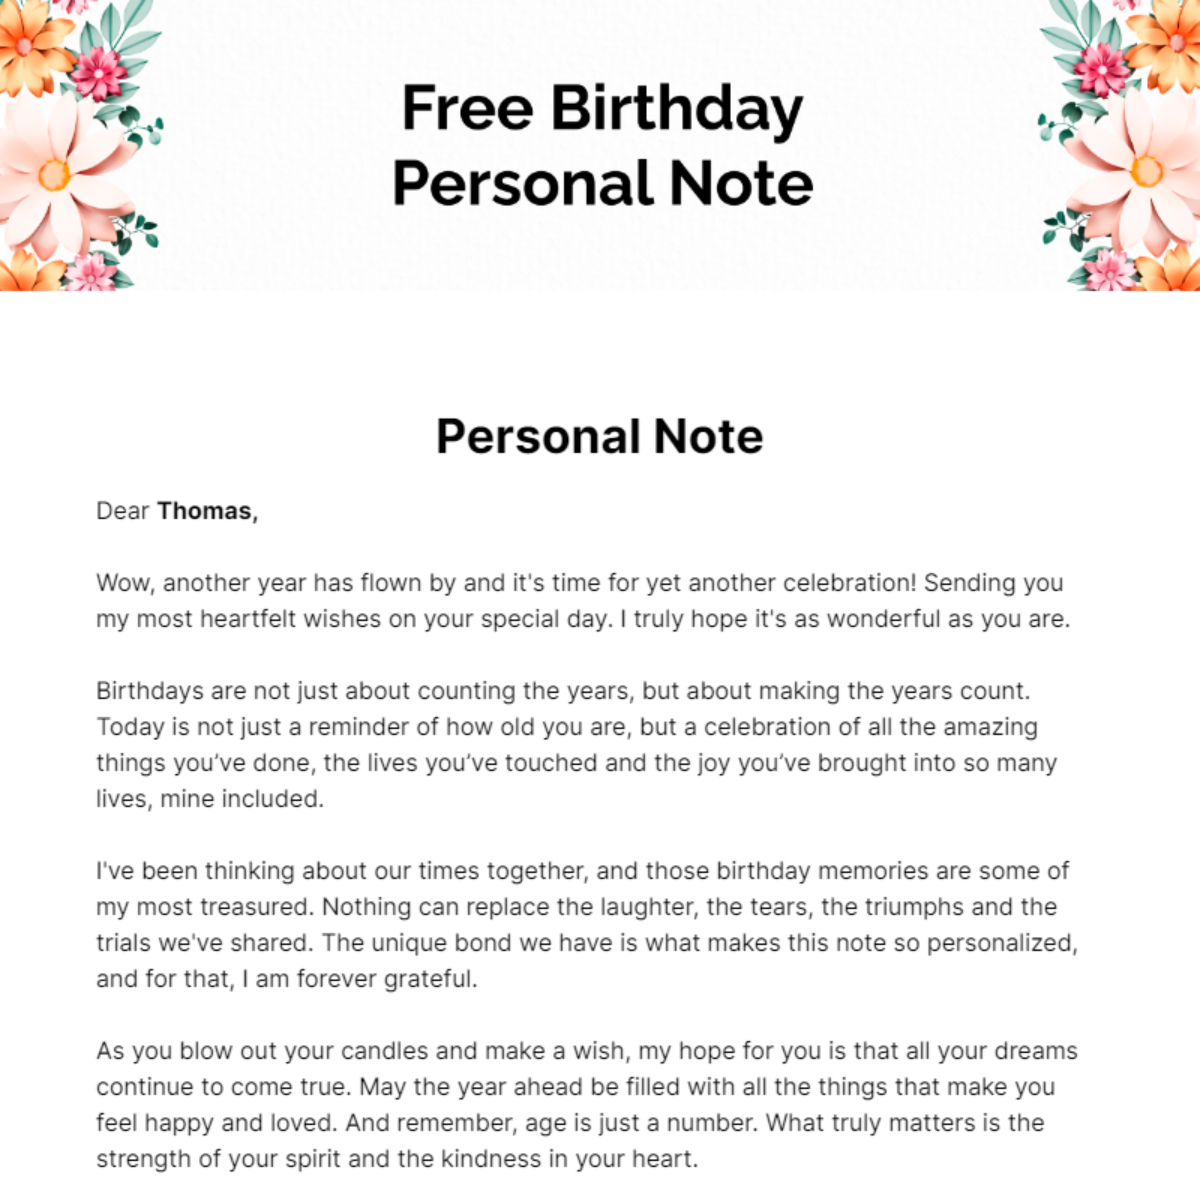 Birthday Personal Note Template